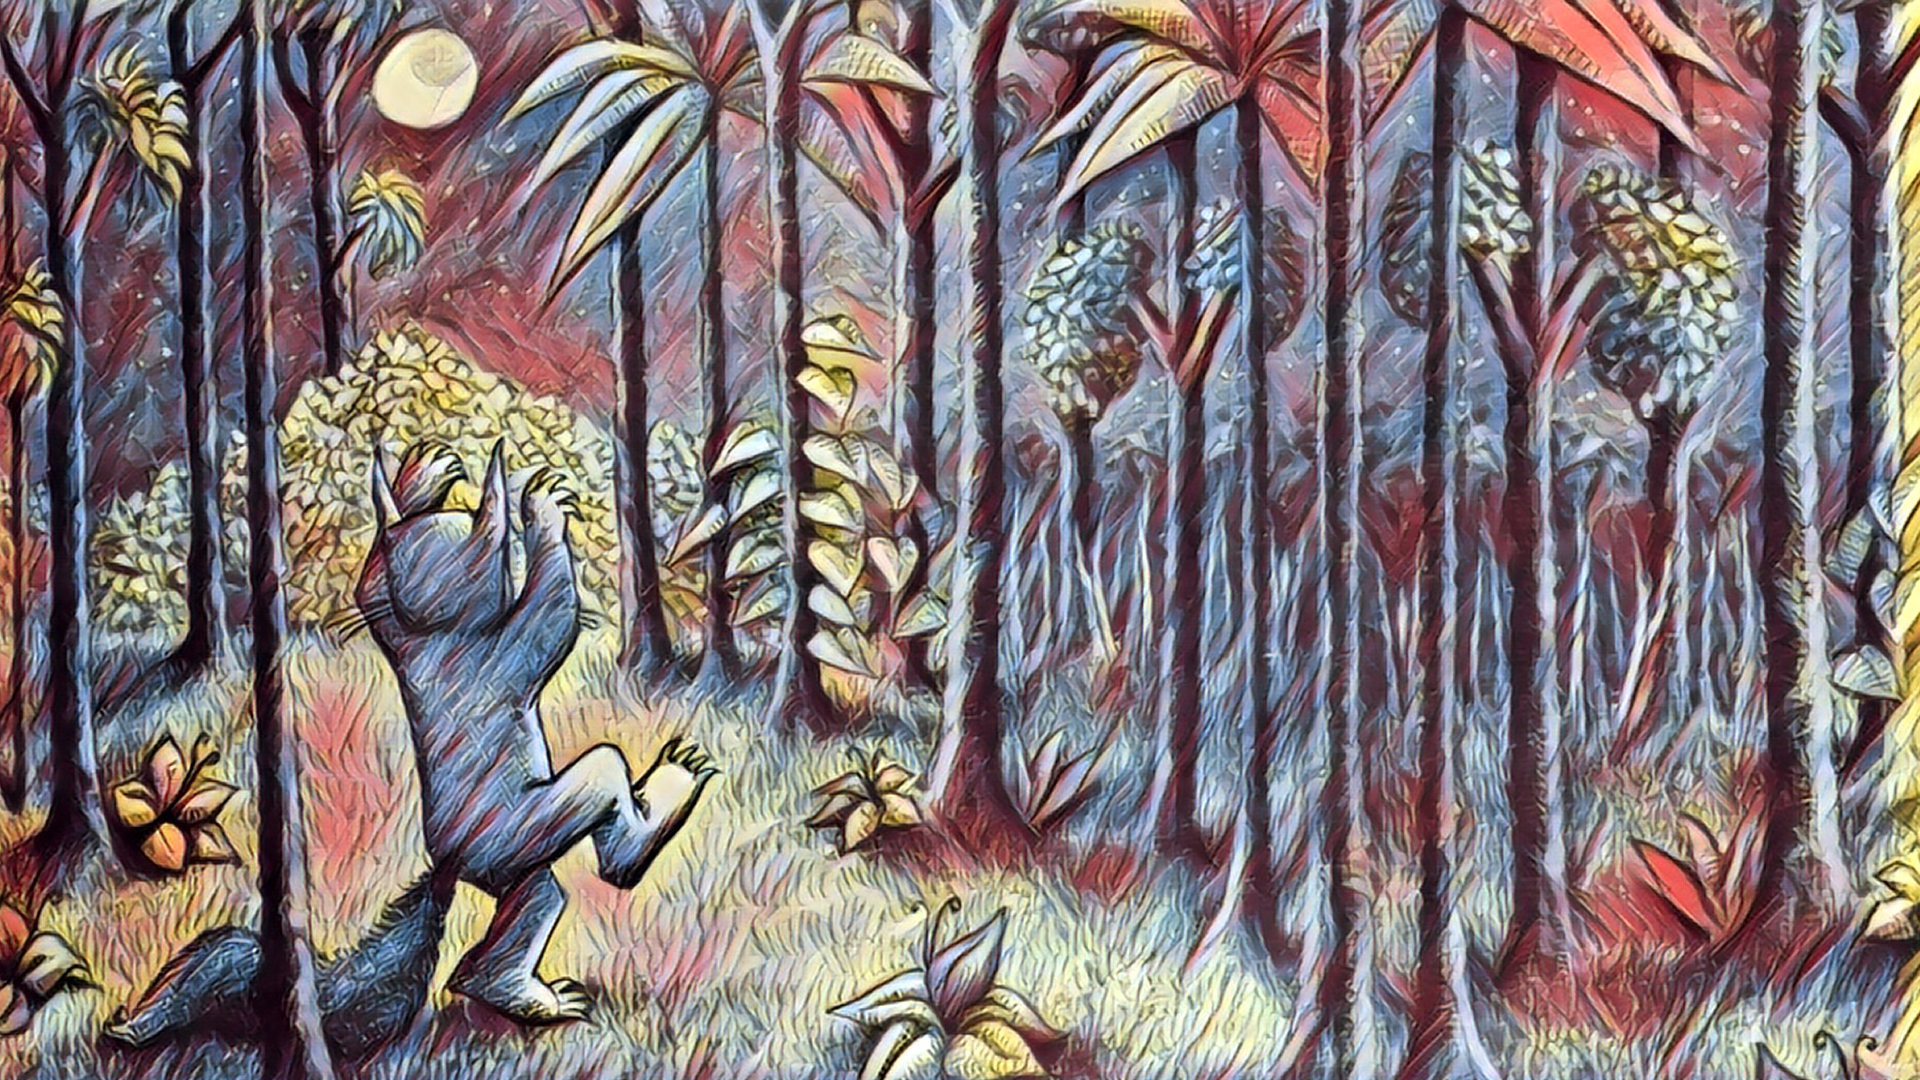 Where The Wild Things Are Night Forest Moon Maurice Sendak 1920x1080